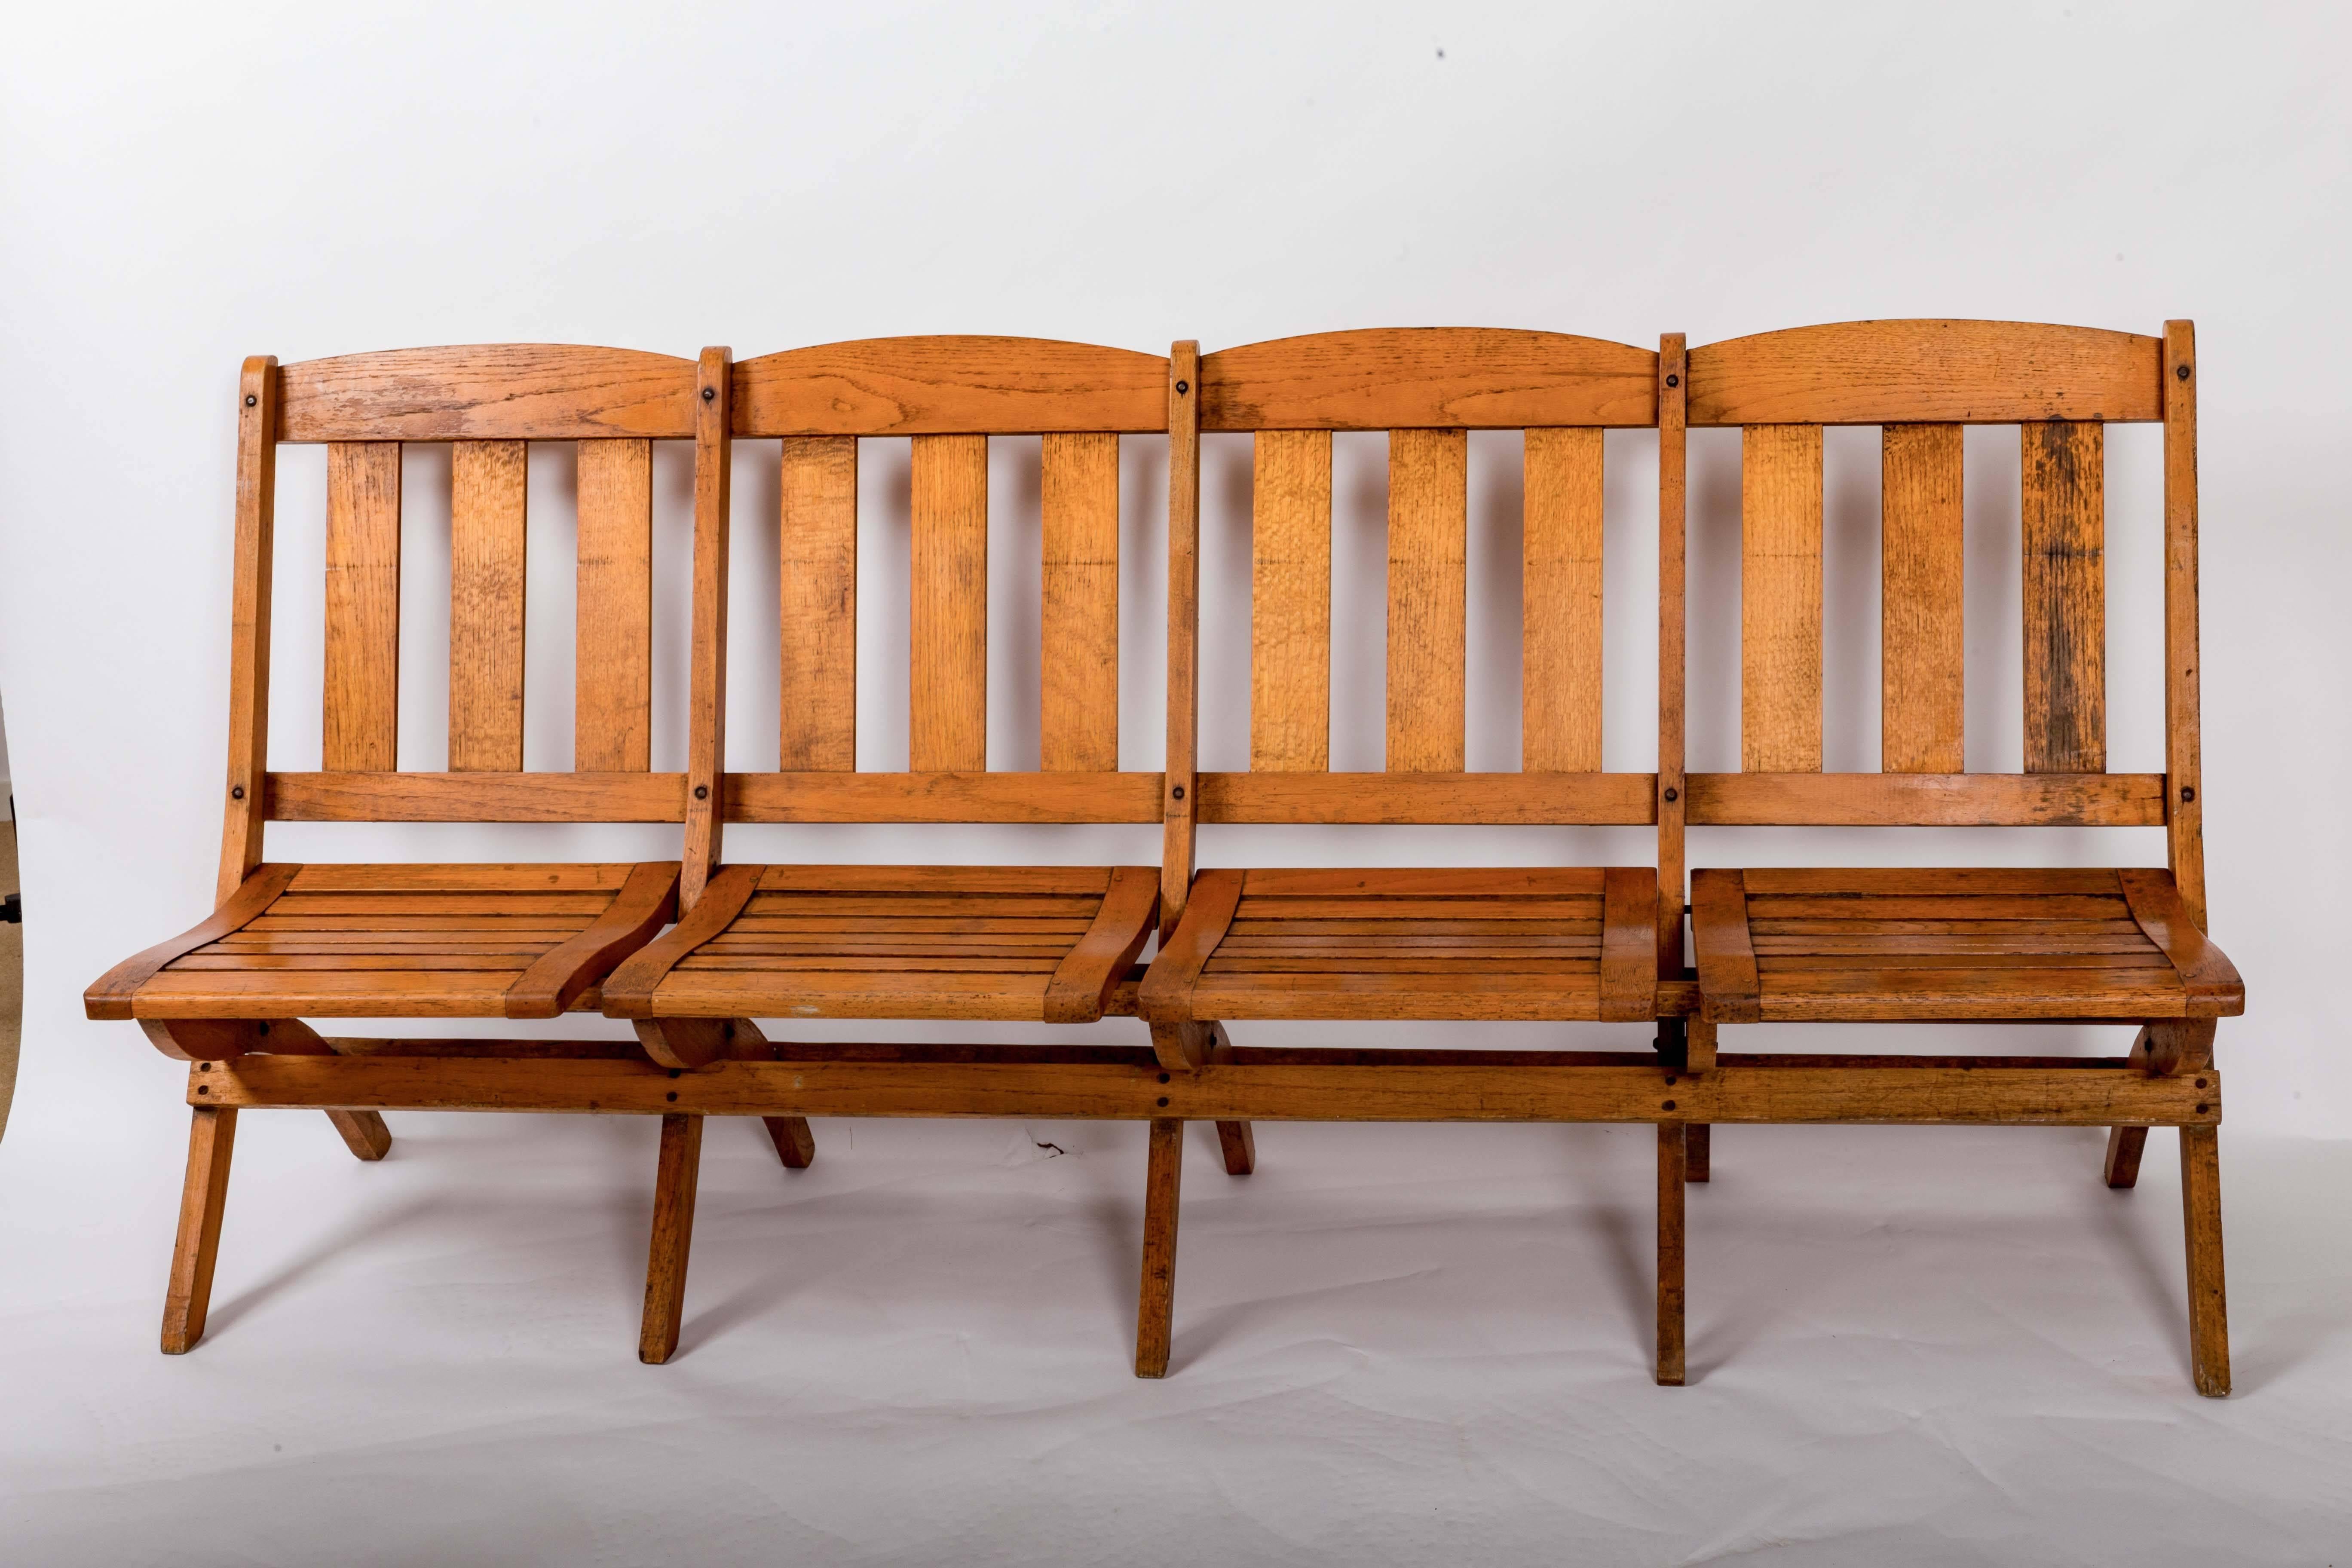 Folding oak railway car bench, slatted back and seat. Each seat folds back individually. Solid construction and deep comfortable seat.